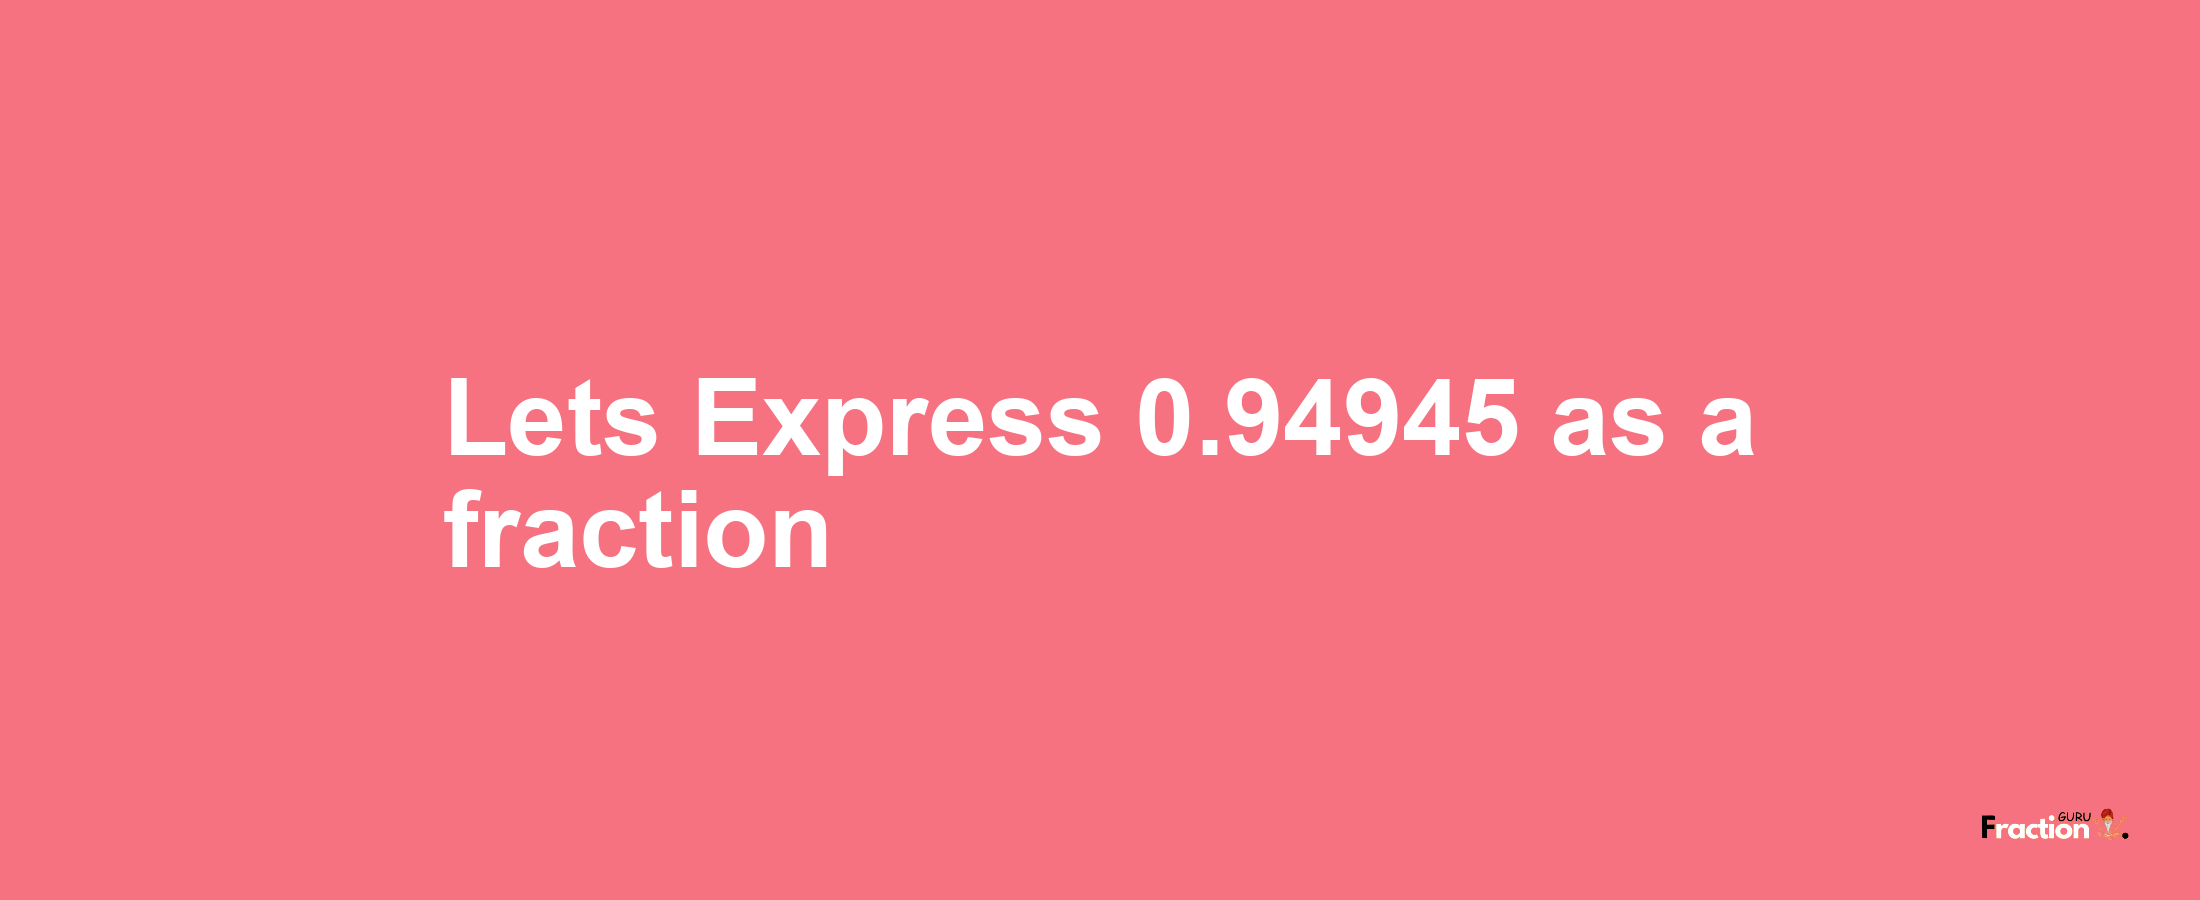 Lets Express 0.94945 as afraction